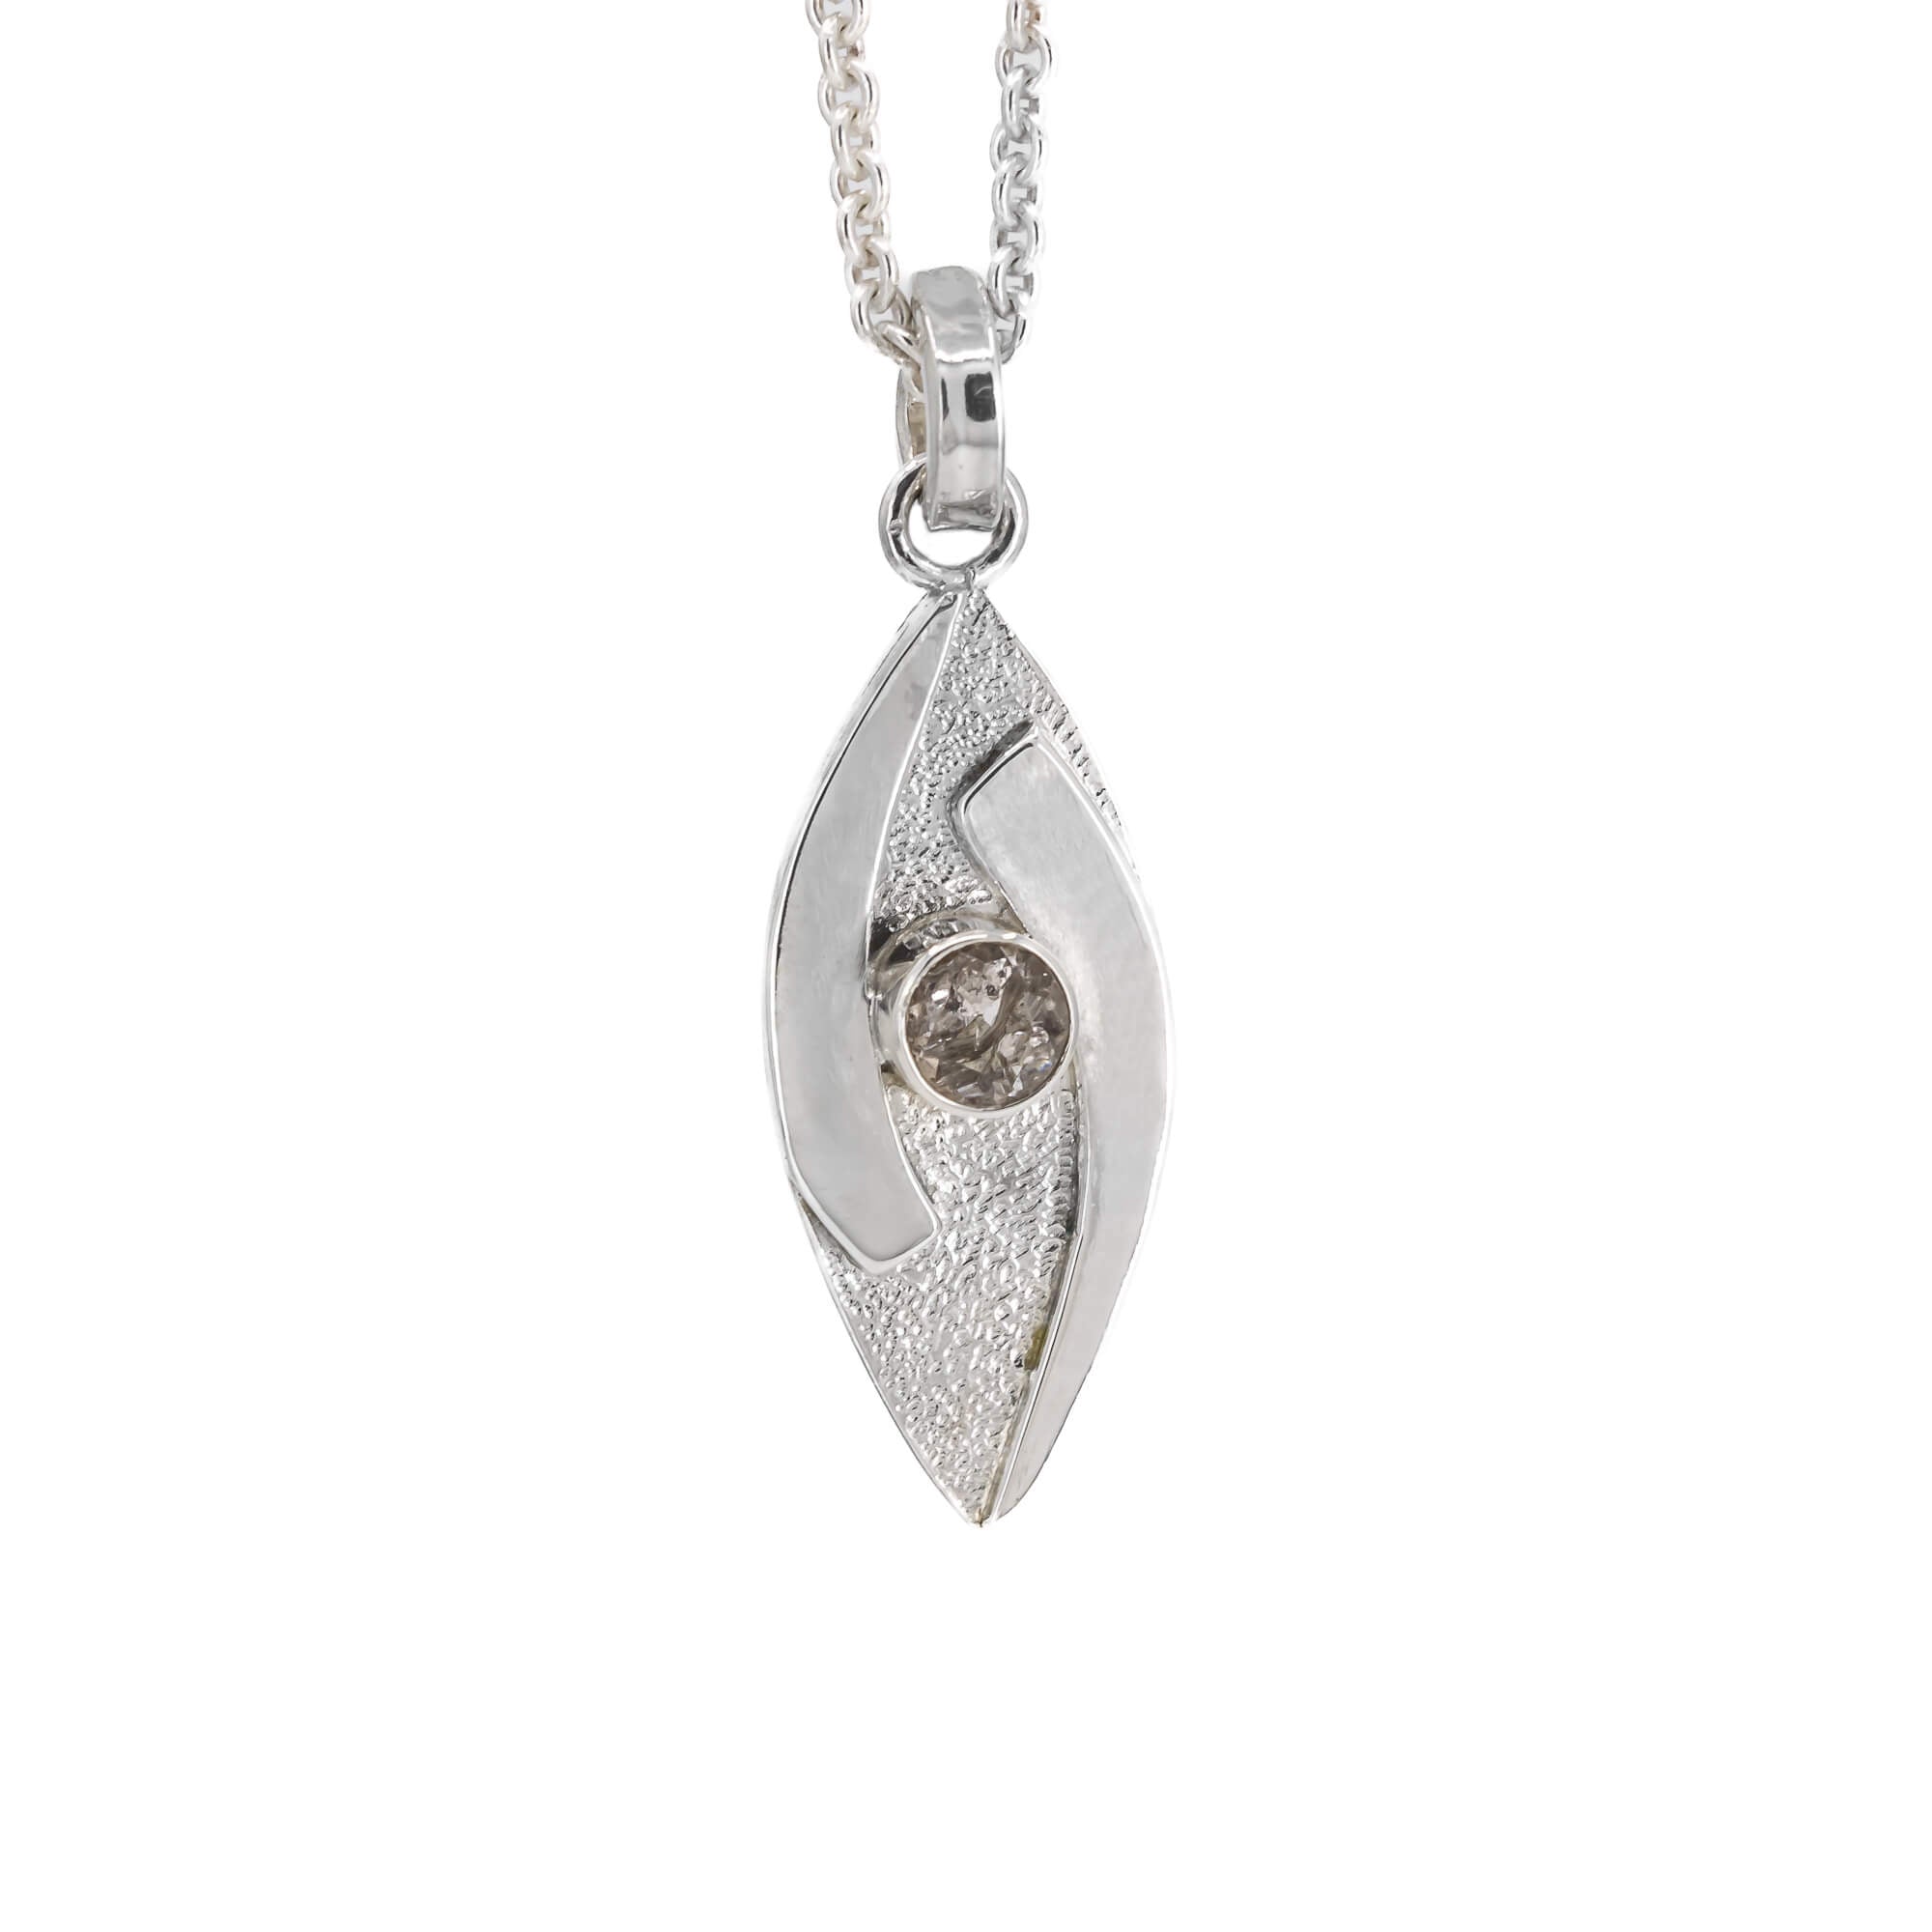 small hugged pendant necklace in sterling silver with a stardust texture and a 4mm Morganite faceted stone